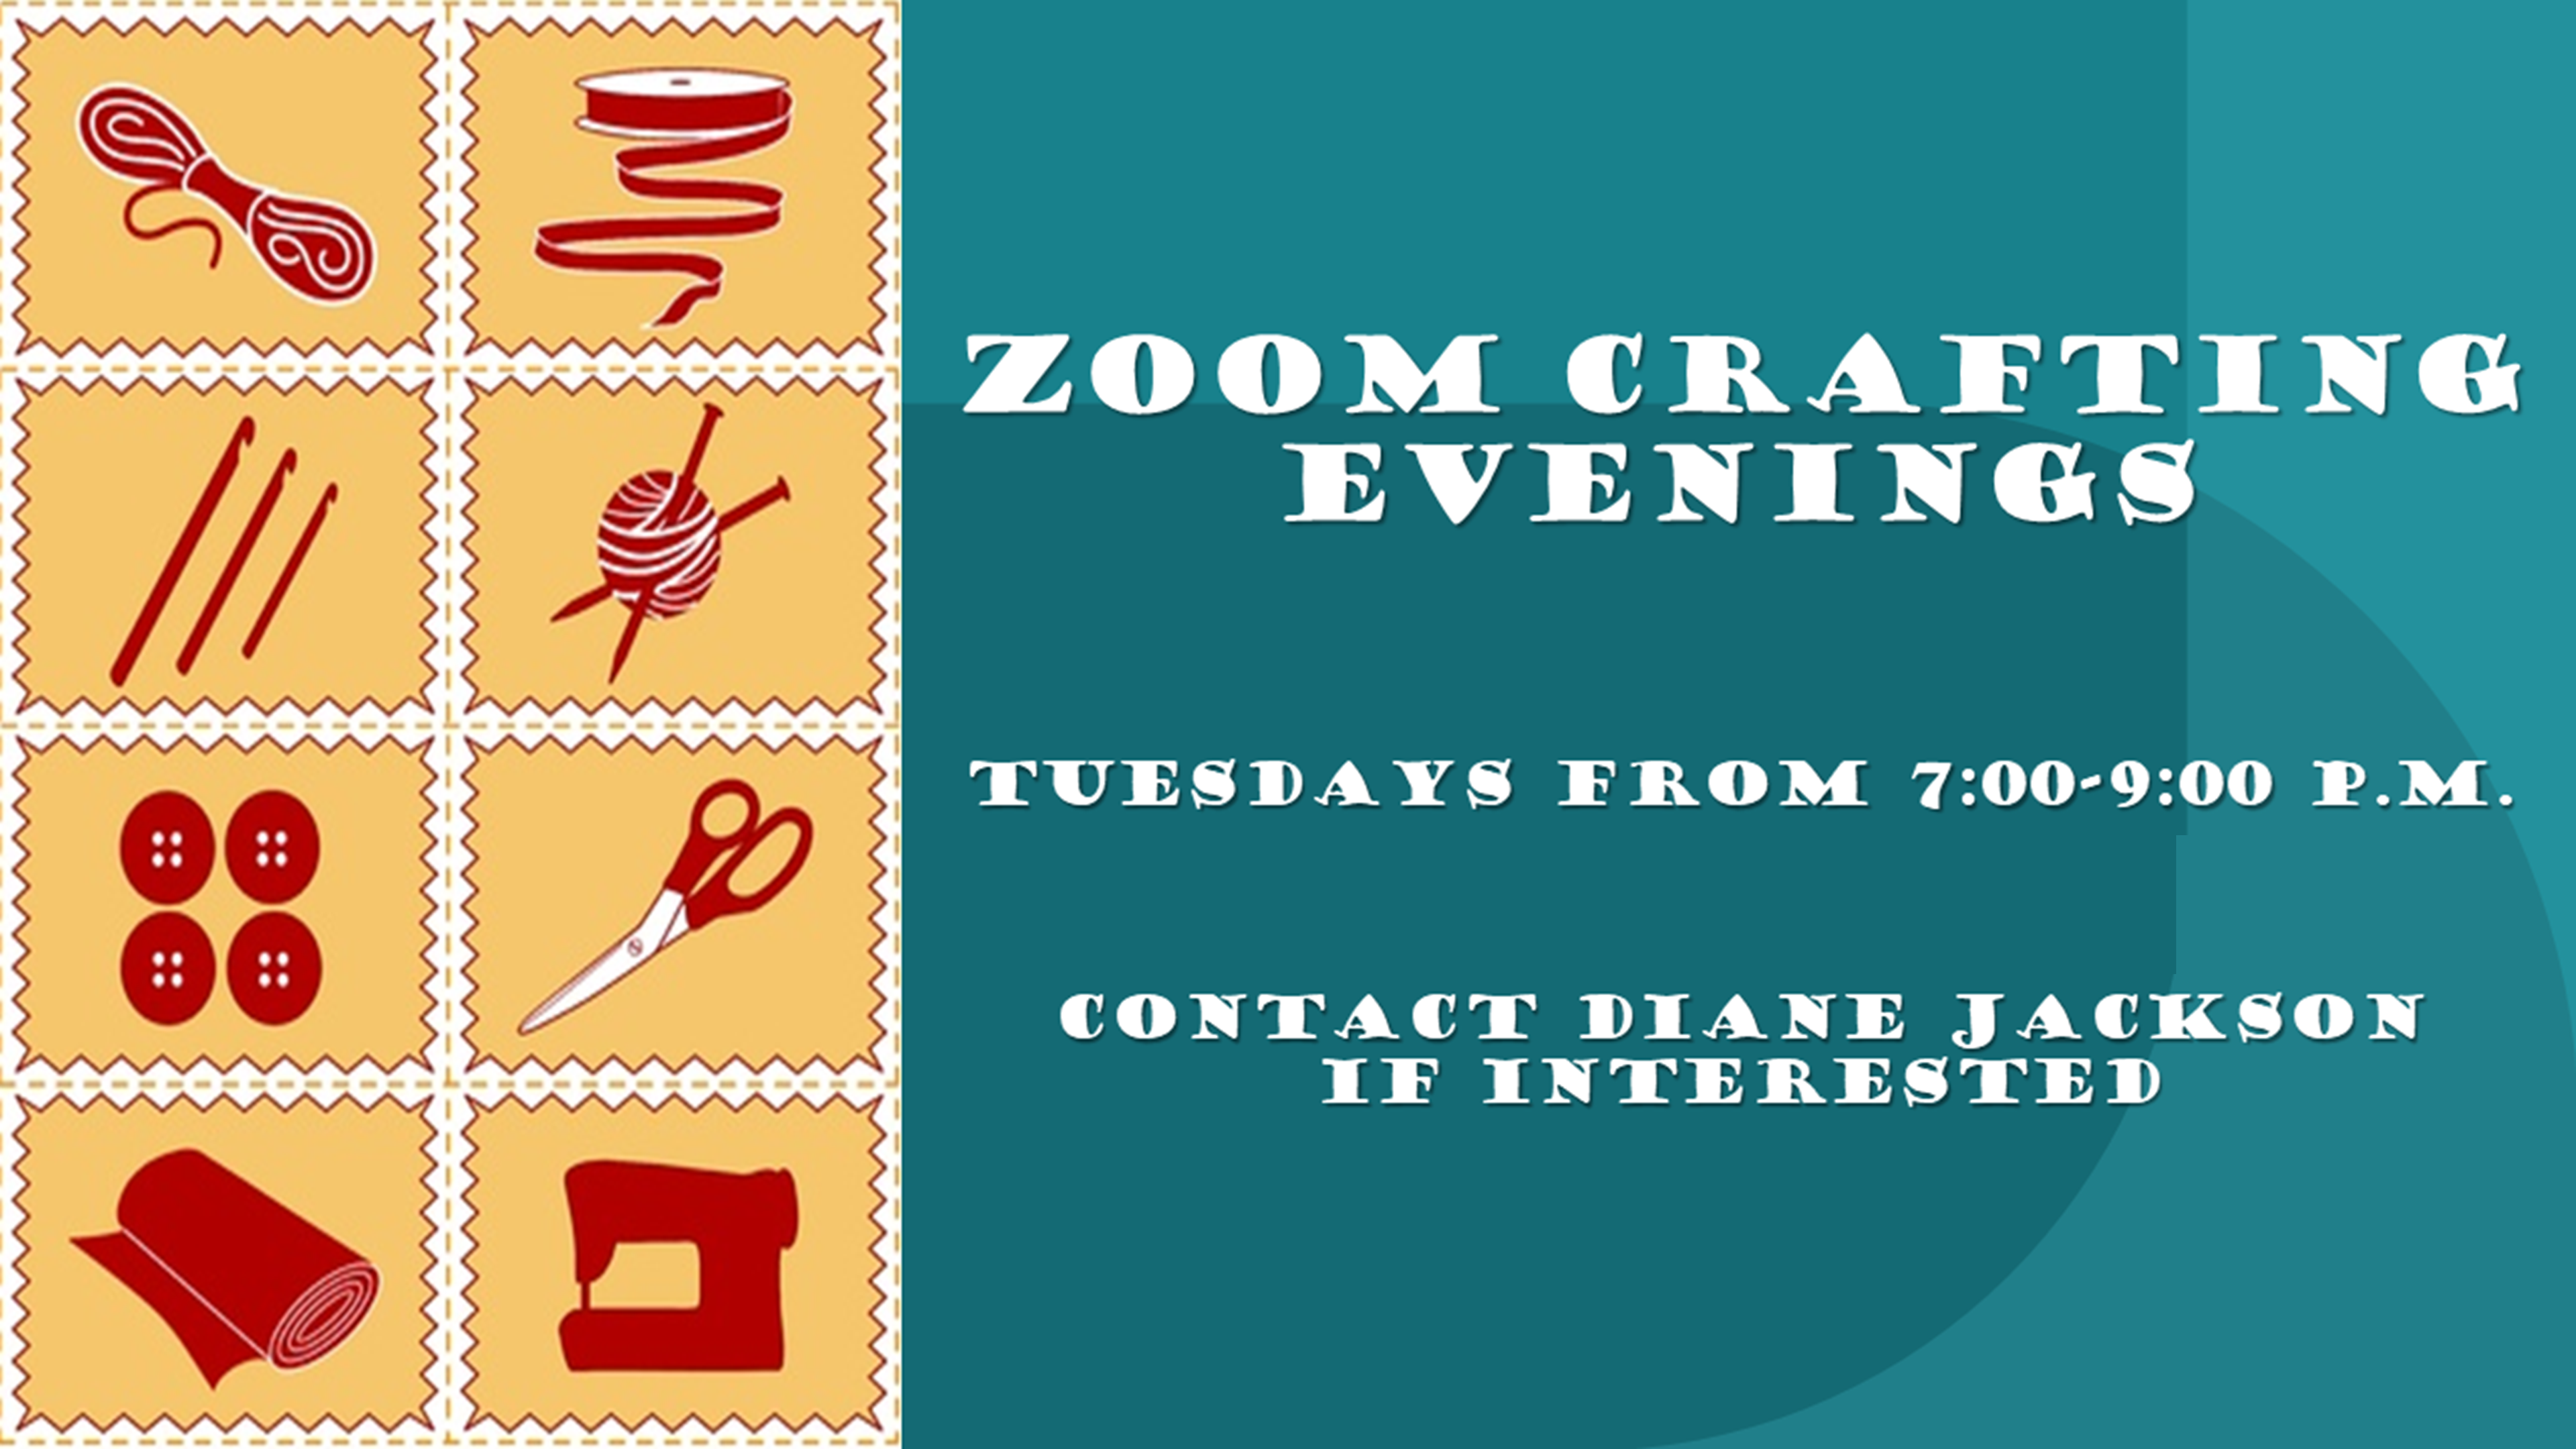 Zoom Crafting Evenings, Tuesdays from 7:00-9:00pm. Contact the office at fumcstillwater@gmail.com if you wish to join.